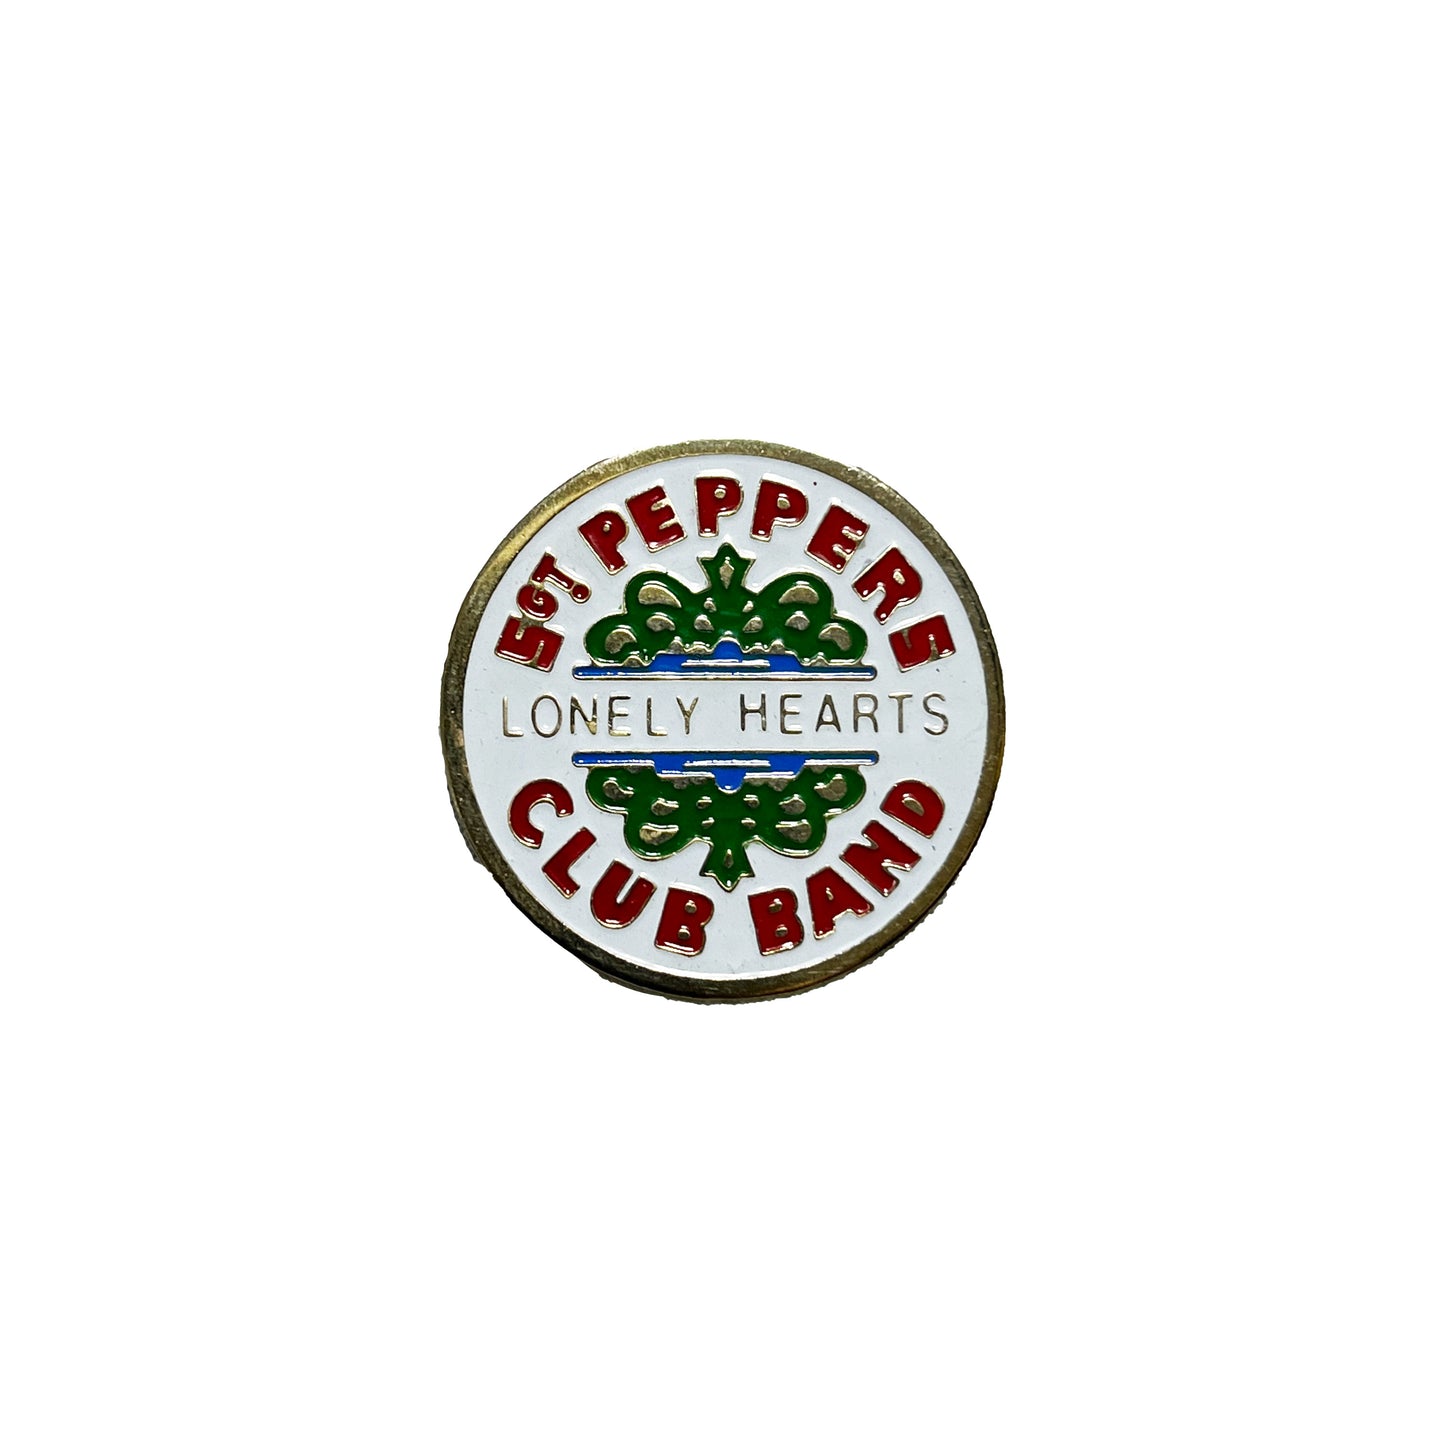 The Beatles "Sgt. Pepper's Lonely Hearts Club Band" Badge